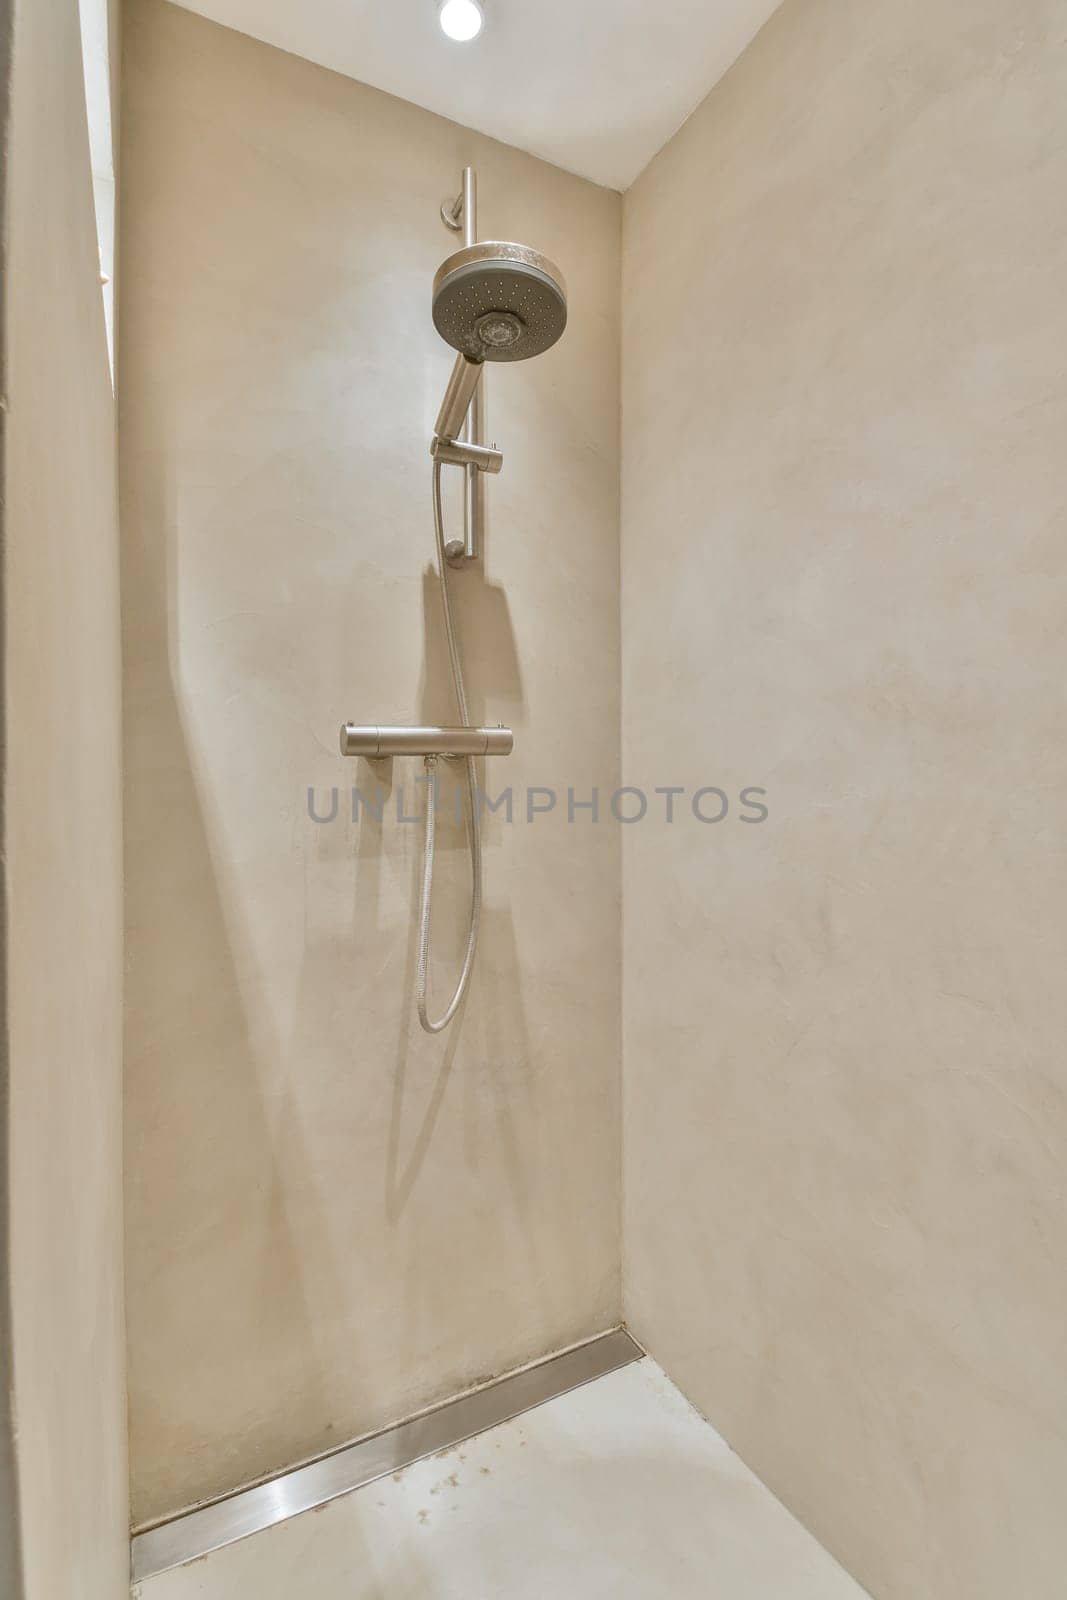 a shower in the corner of a room with beige walls and white tiles on the floor, there is a light coming from above